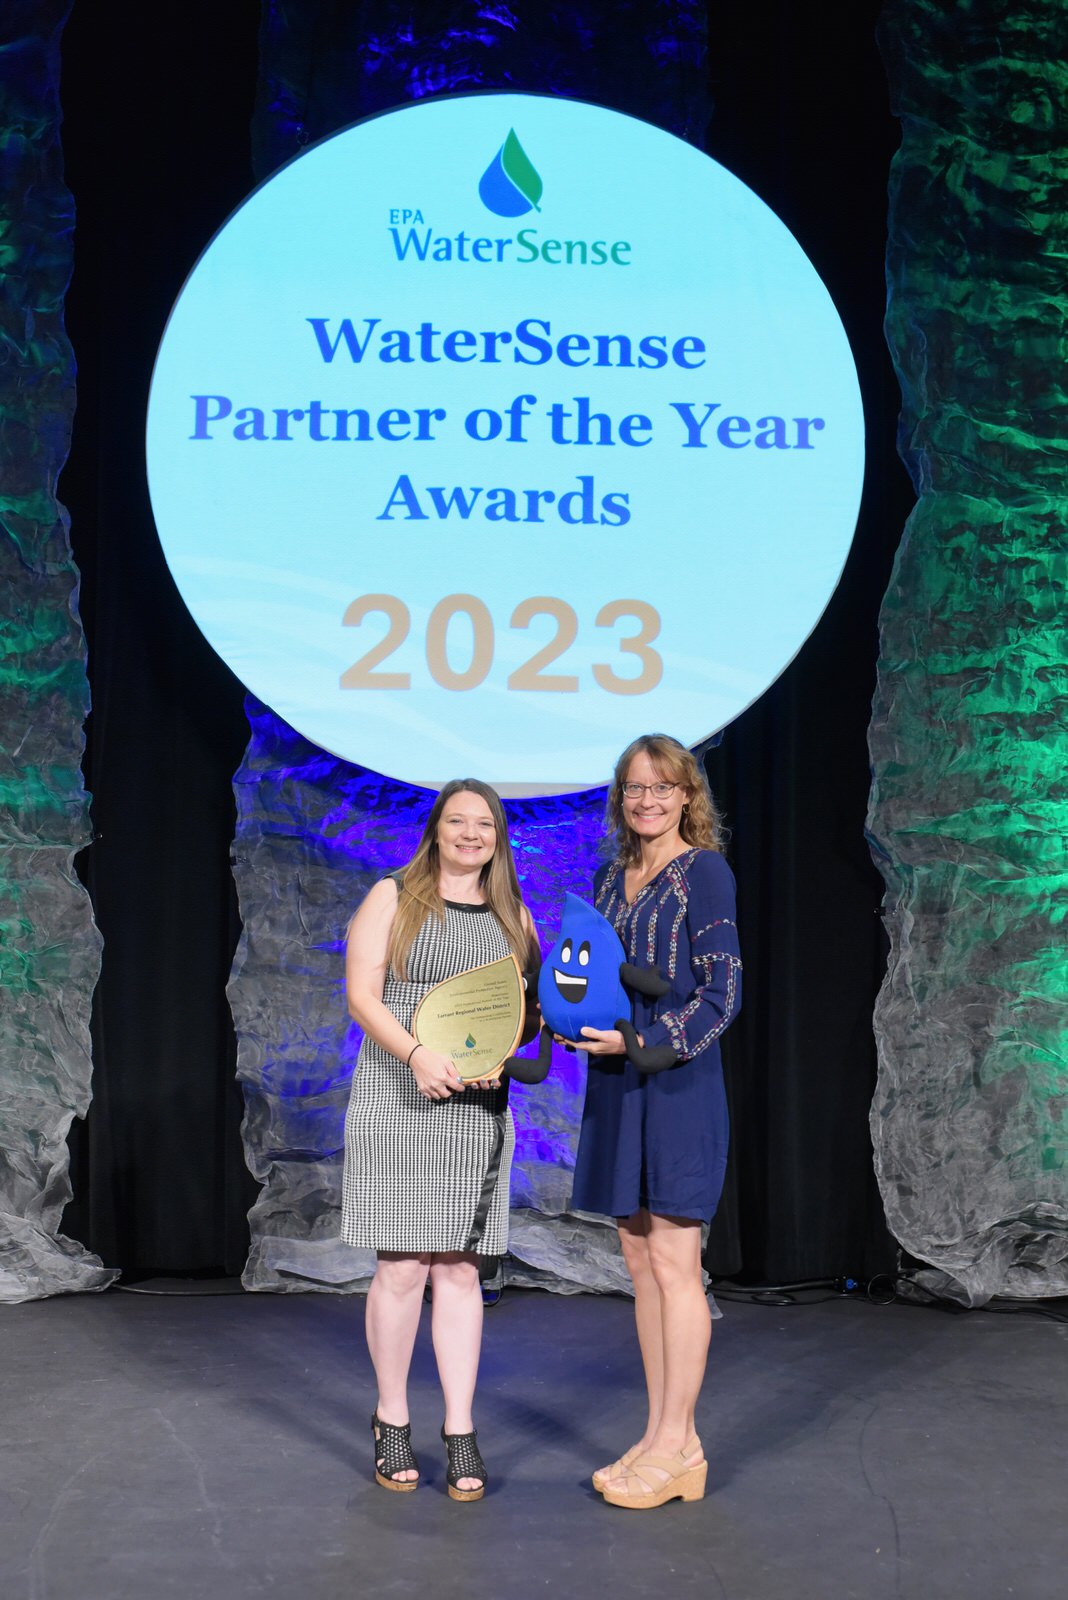 District receives EPA’s 2023 WaterSense Partner of the Year Award